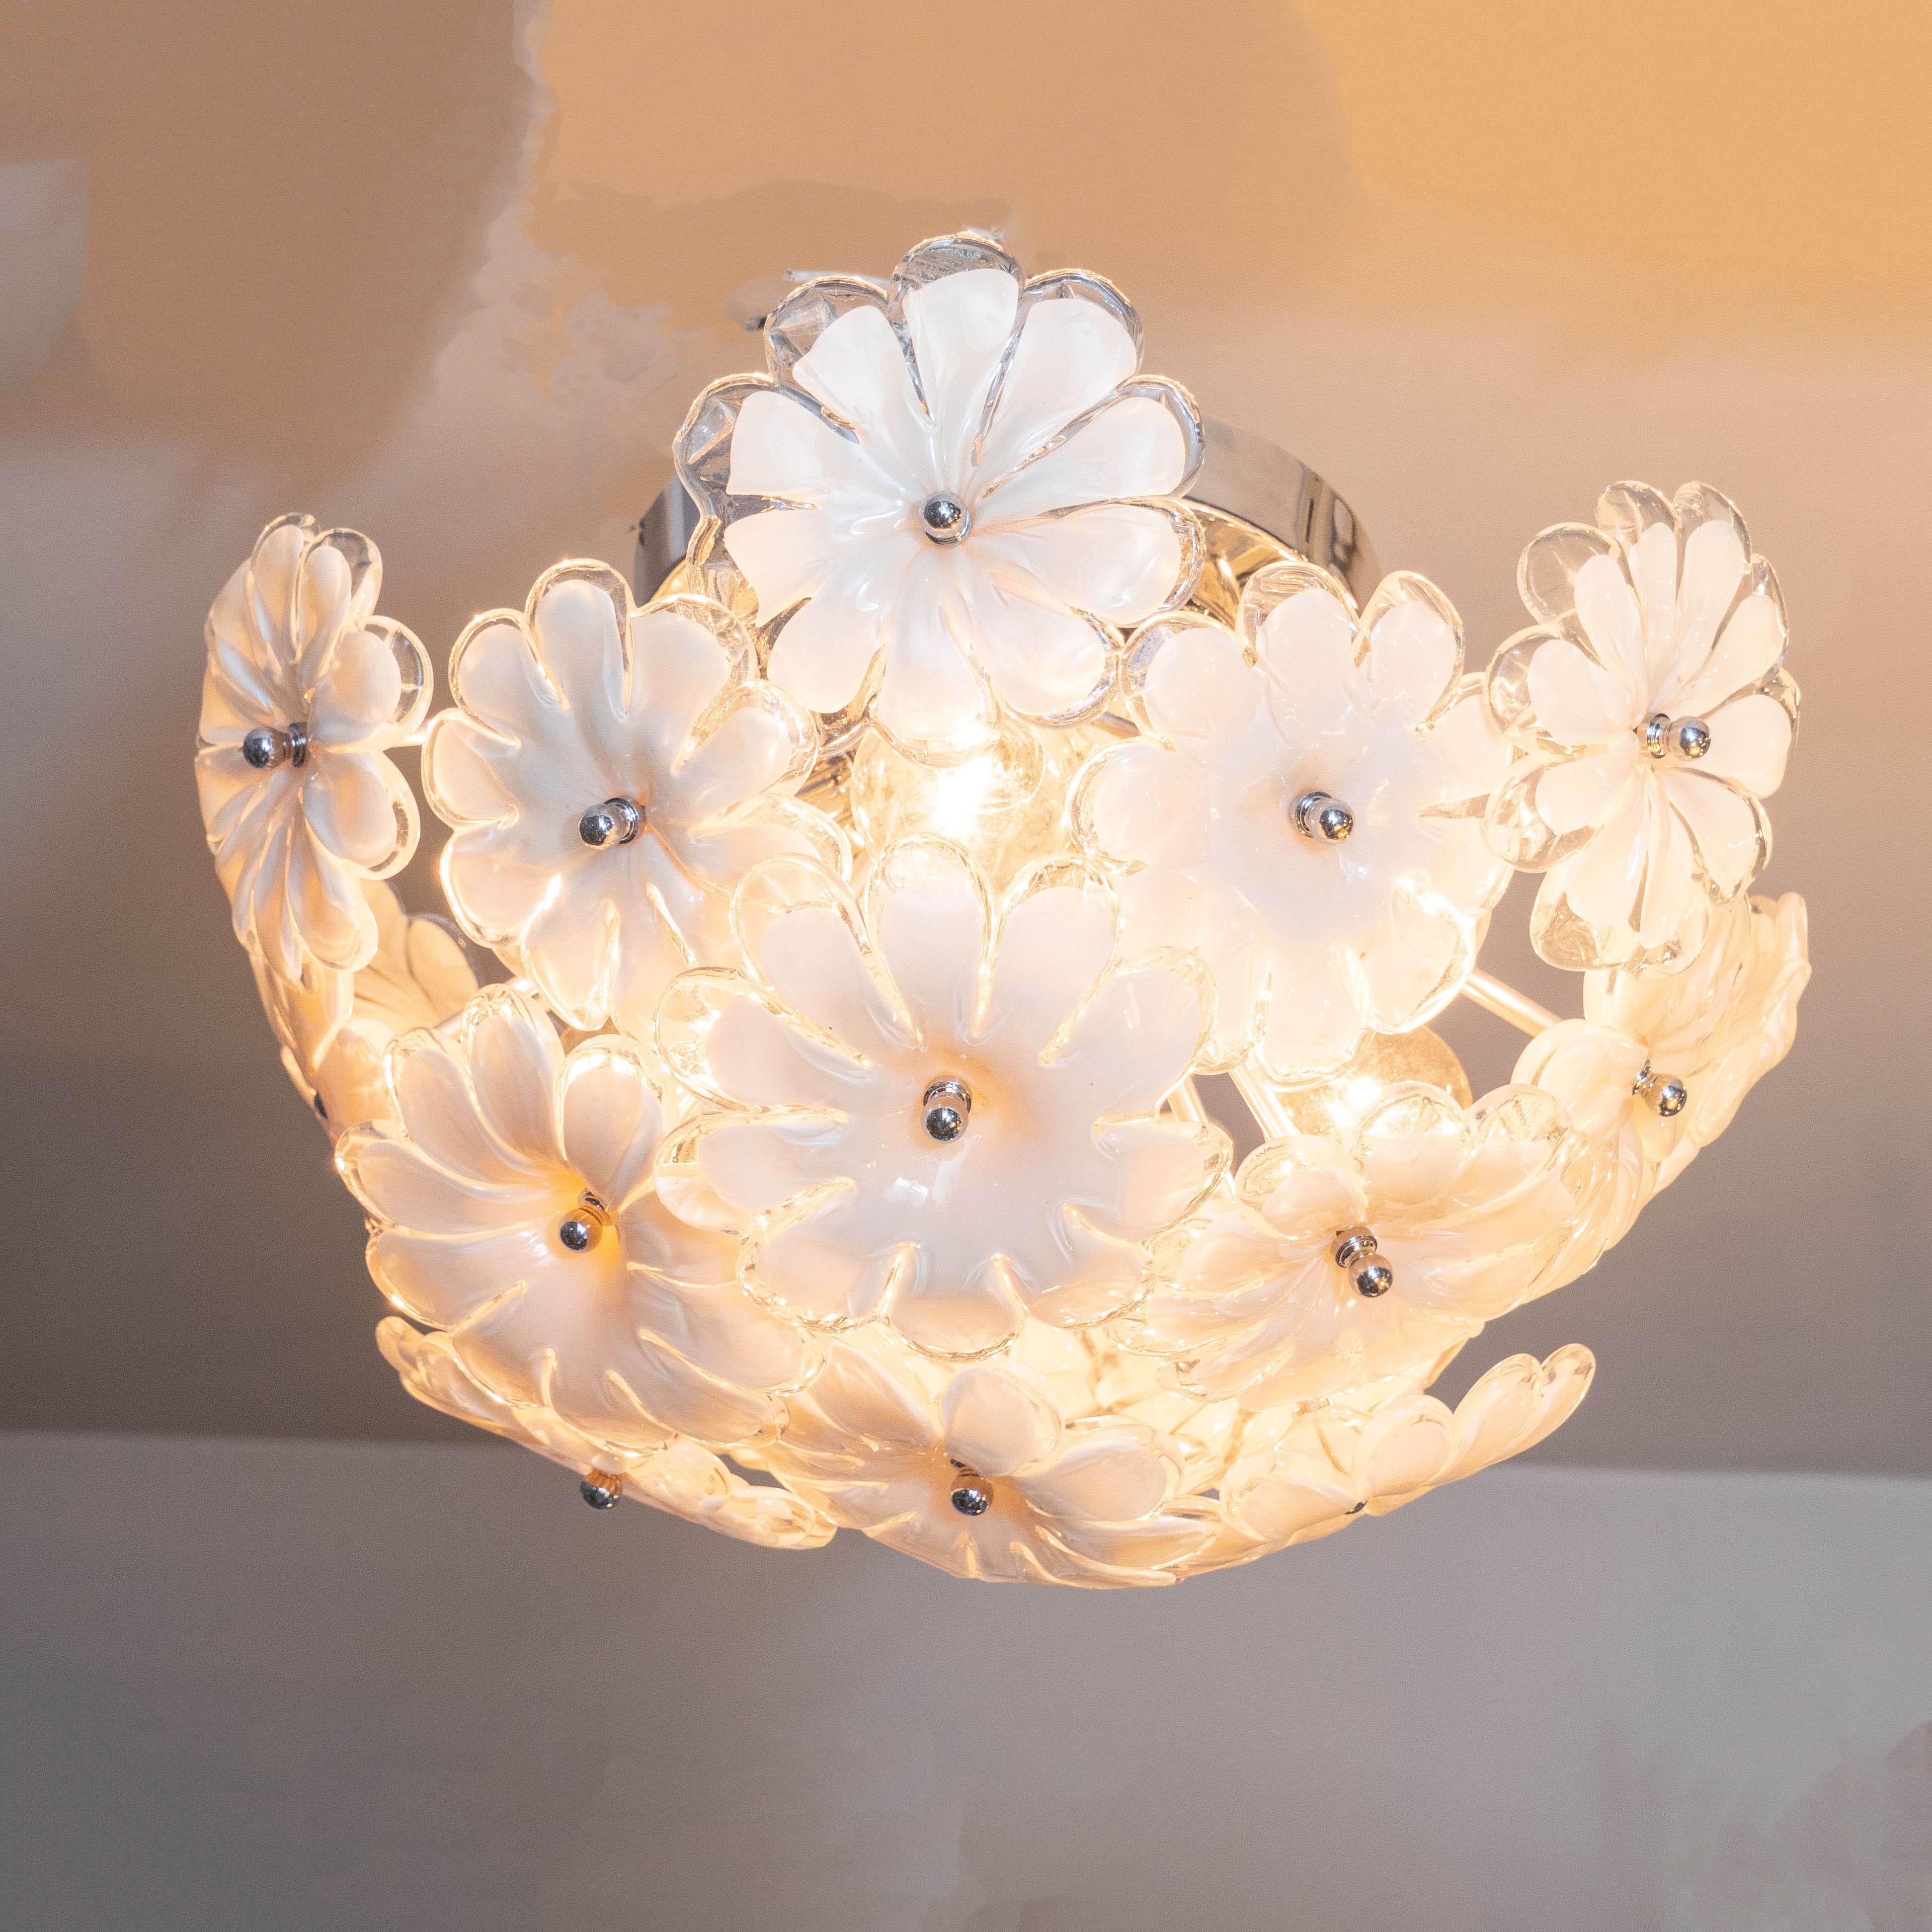 This stunning and graphic Mid-Century Modern flush mount was realized in Murano, Italy- the island off the coast of Venice renowned for centuries for its superlative glass production- circa 1970. It features an abundance of stylized white opaque